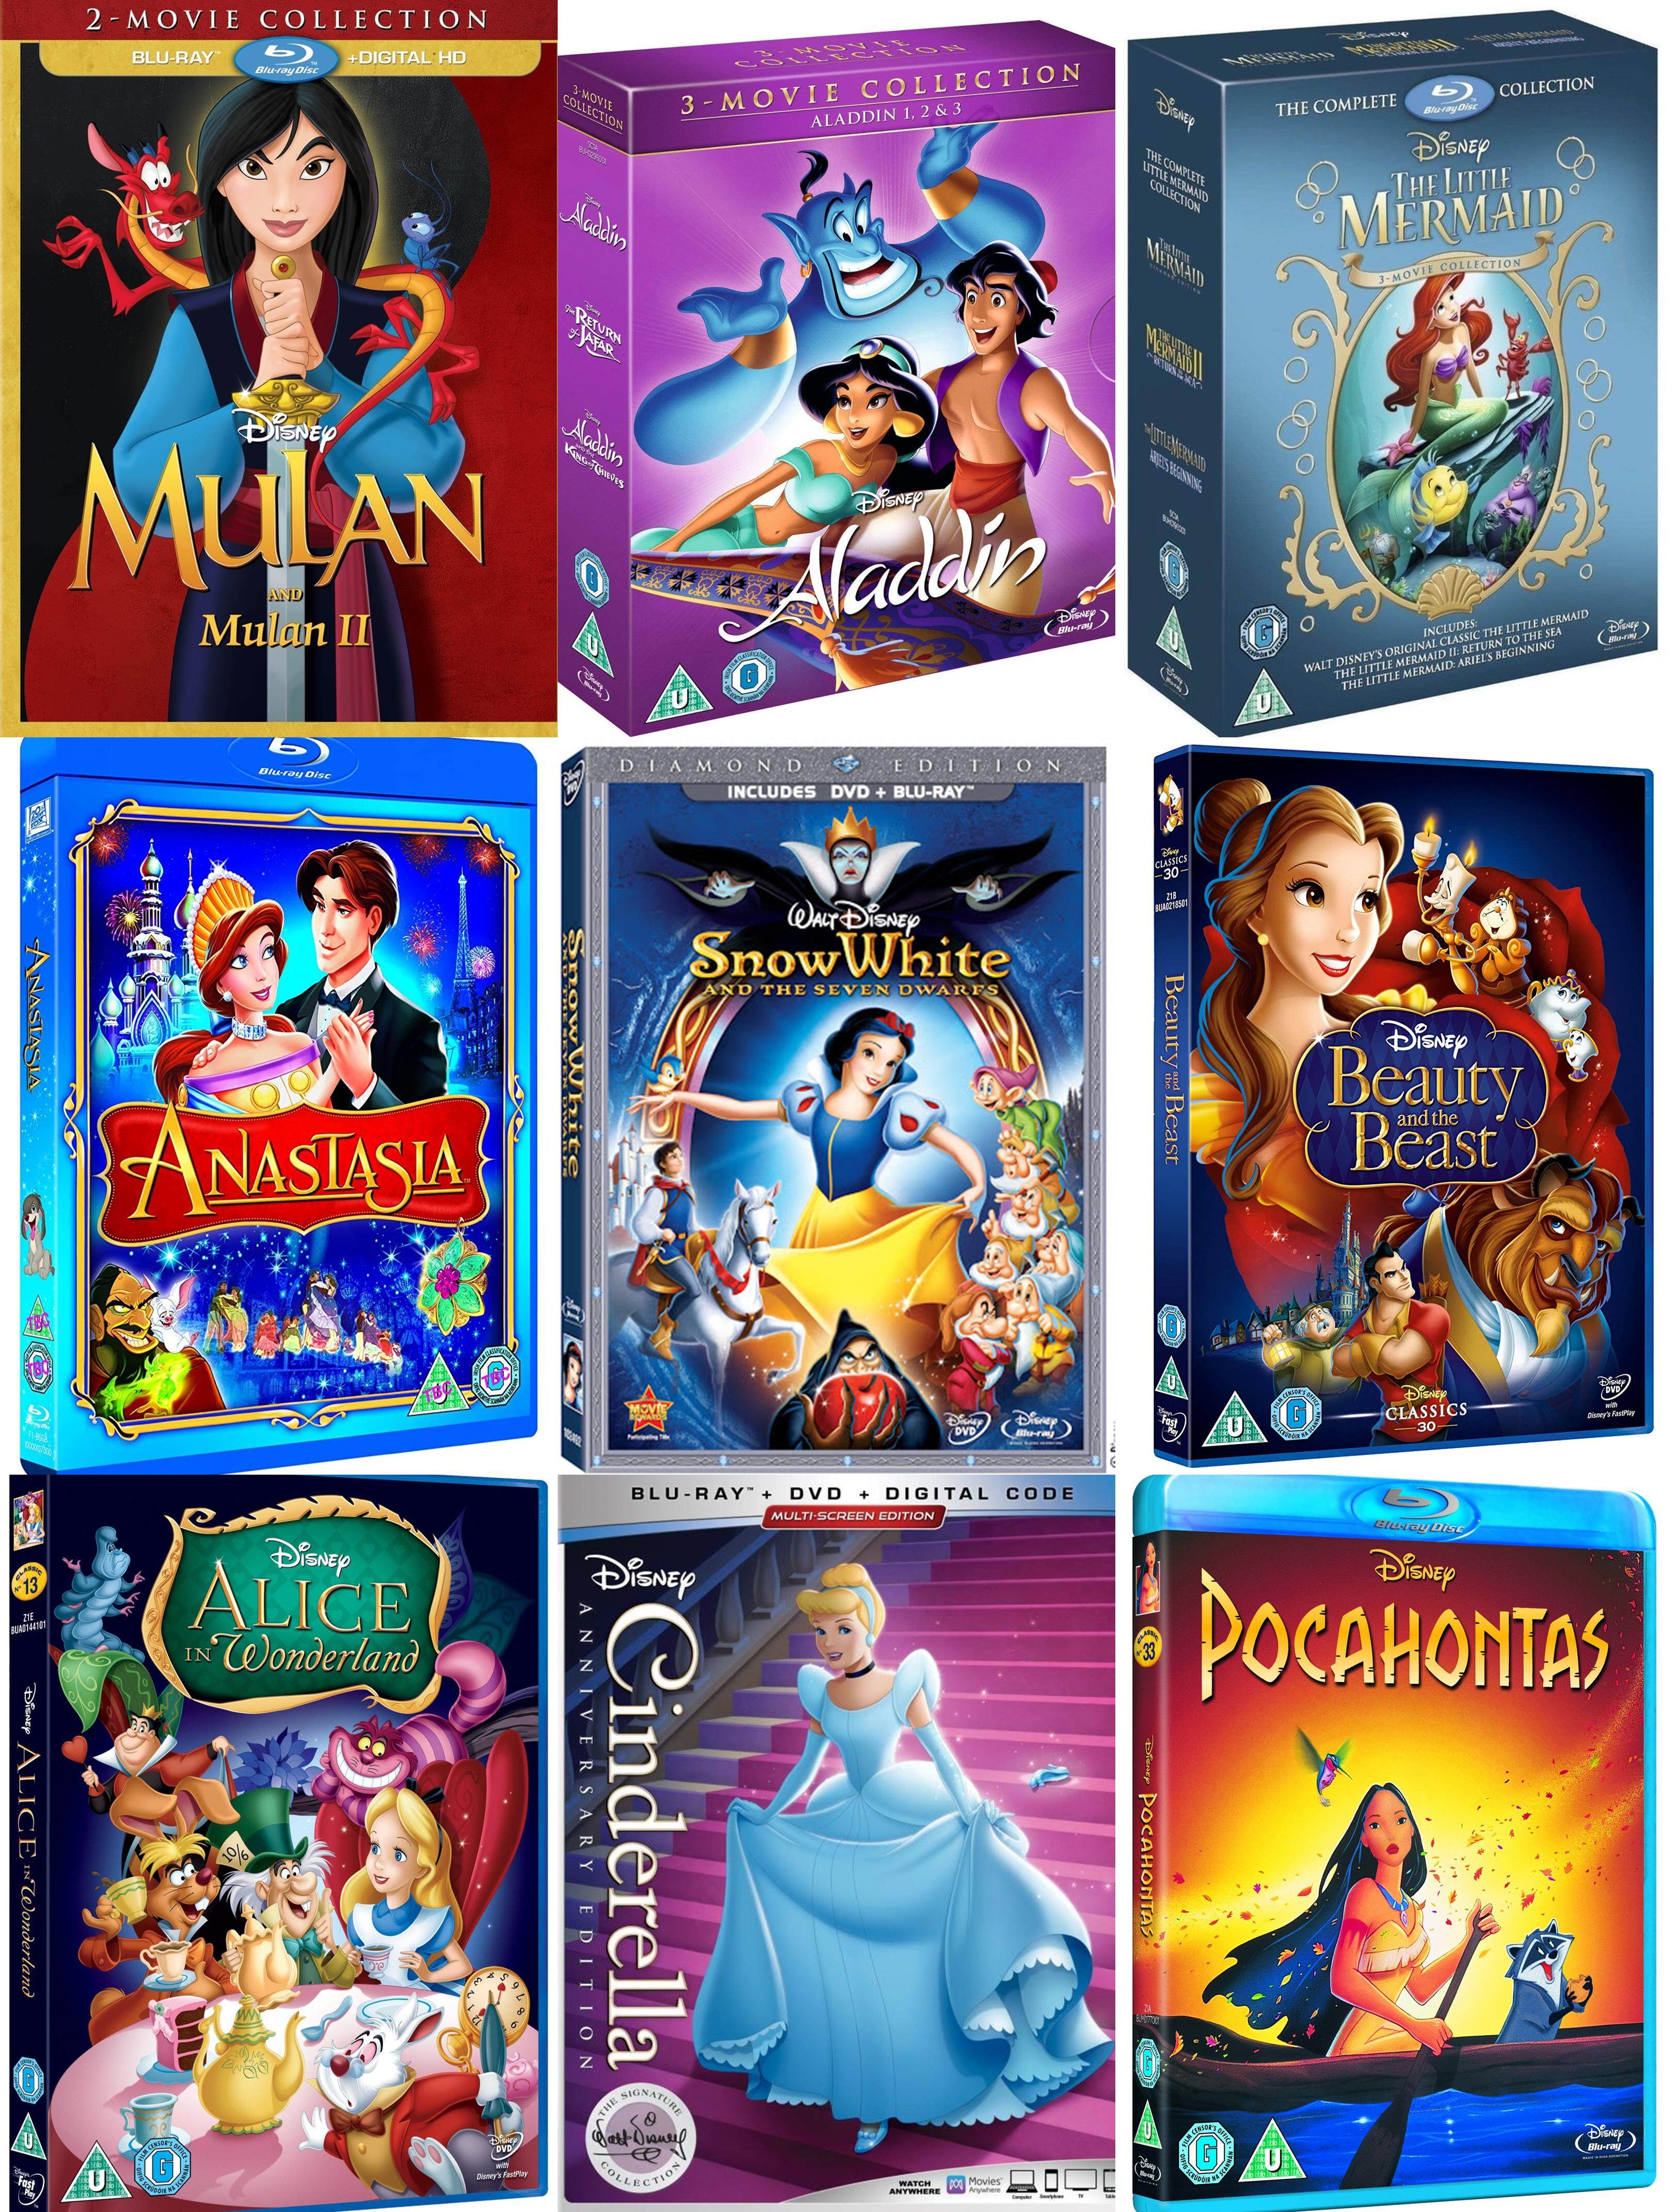 73 x Best of Cartoon Animation Bluray Movies Collection Part 3 /Disney  Classic 1080p Resolution/Subtitles/ Ready Stock/ Fast Shipping | Lazada